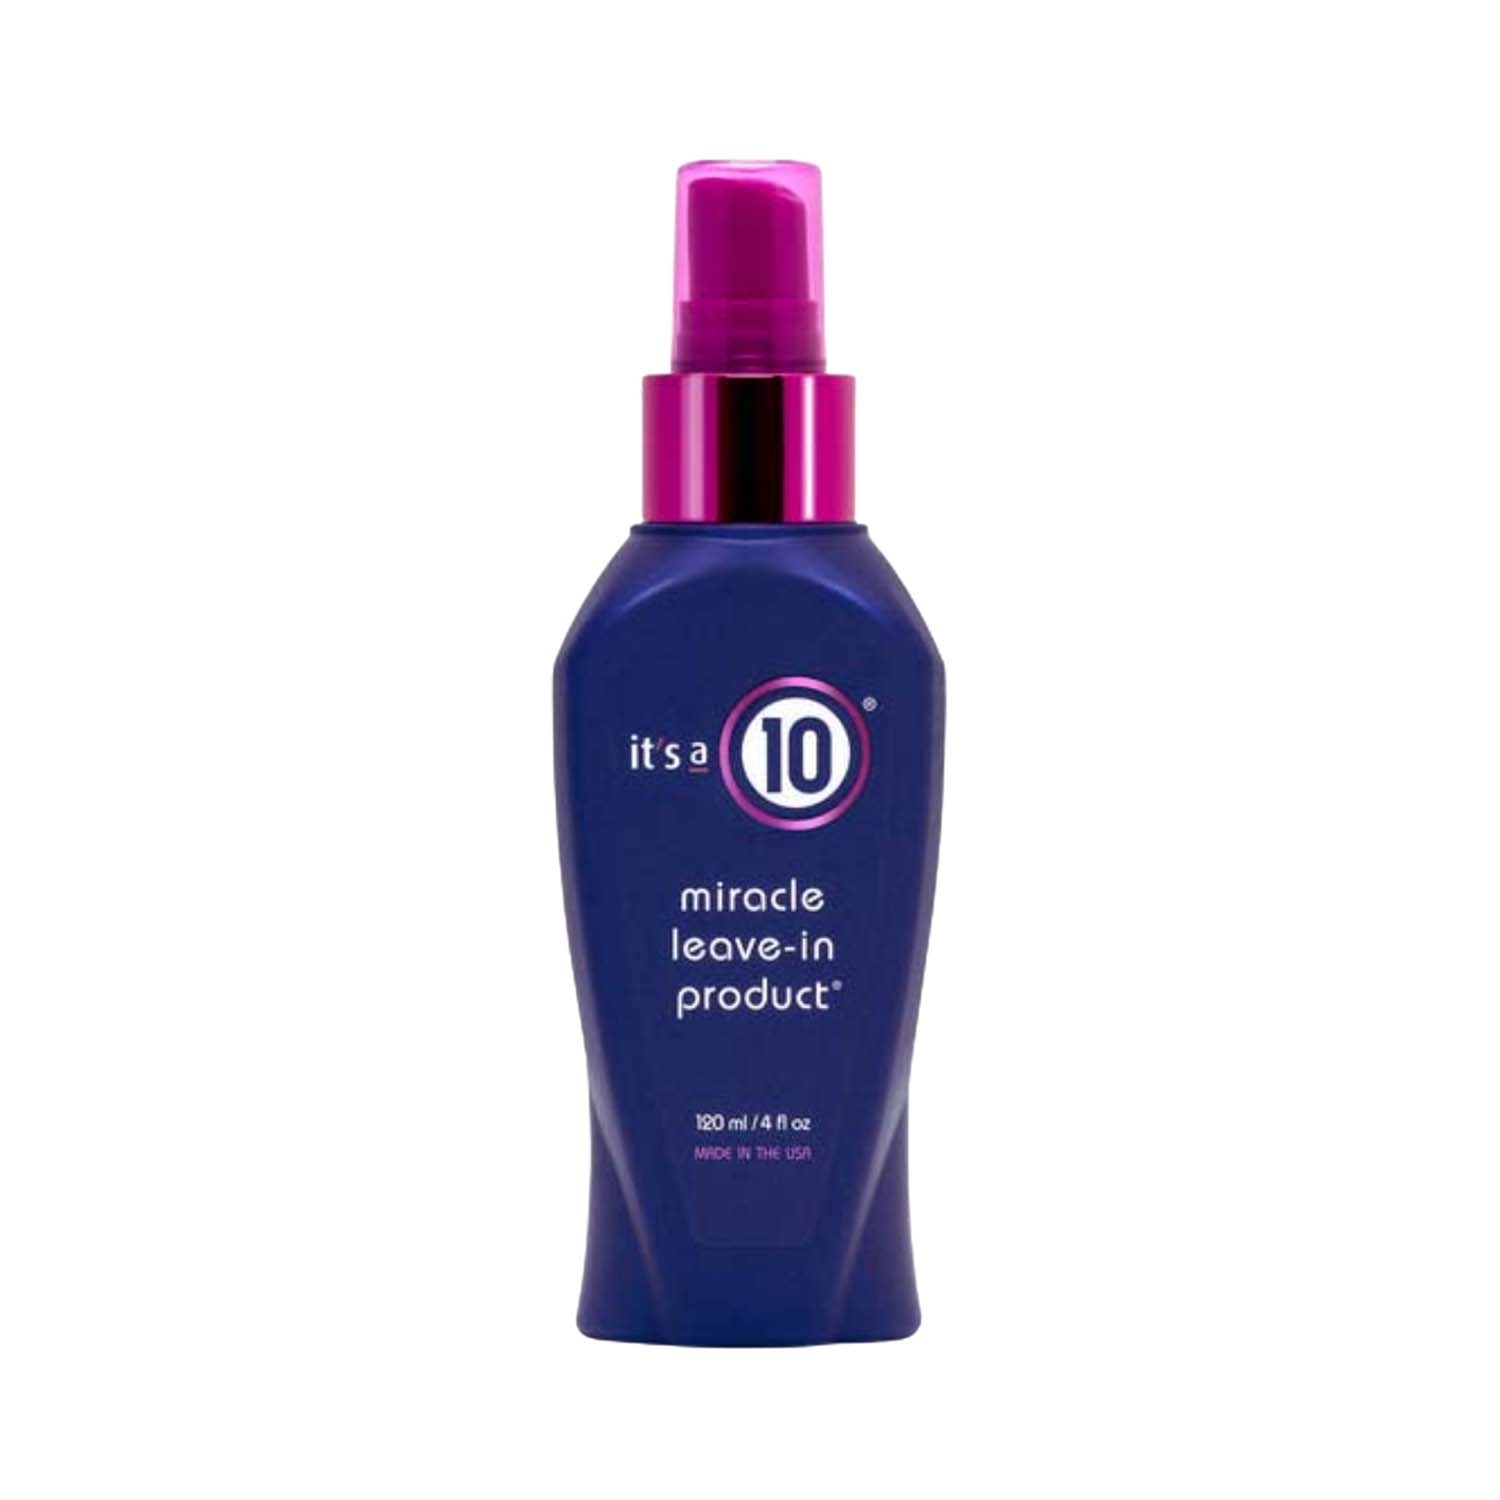 It's a 10 Haircare | It's a 10 Haircare Miracle Leave In Product (120ml)